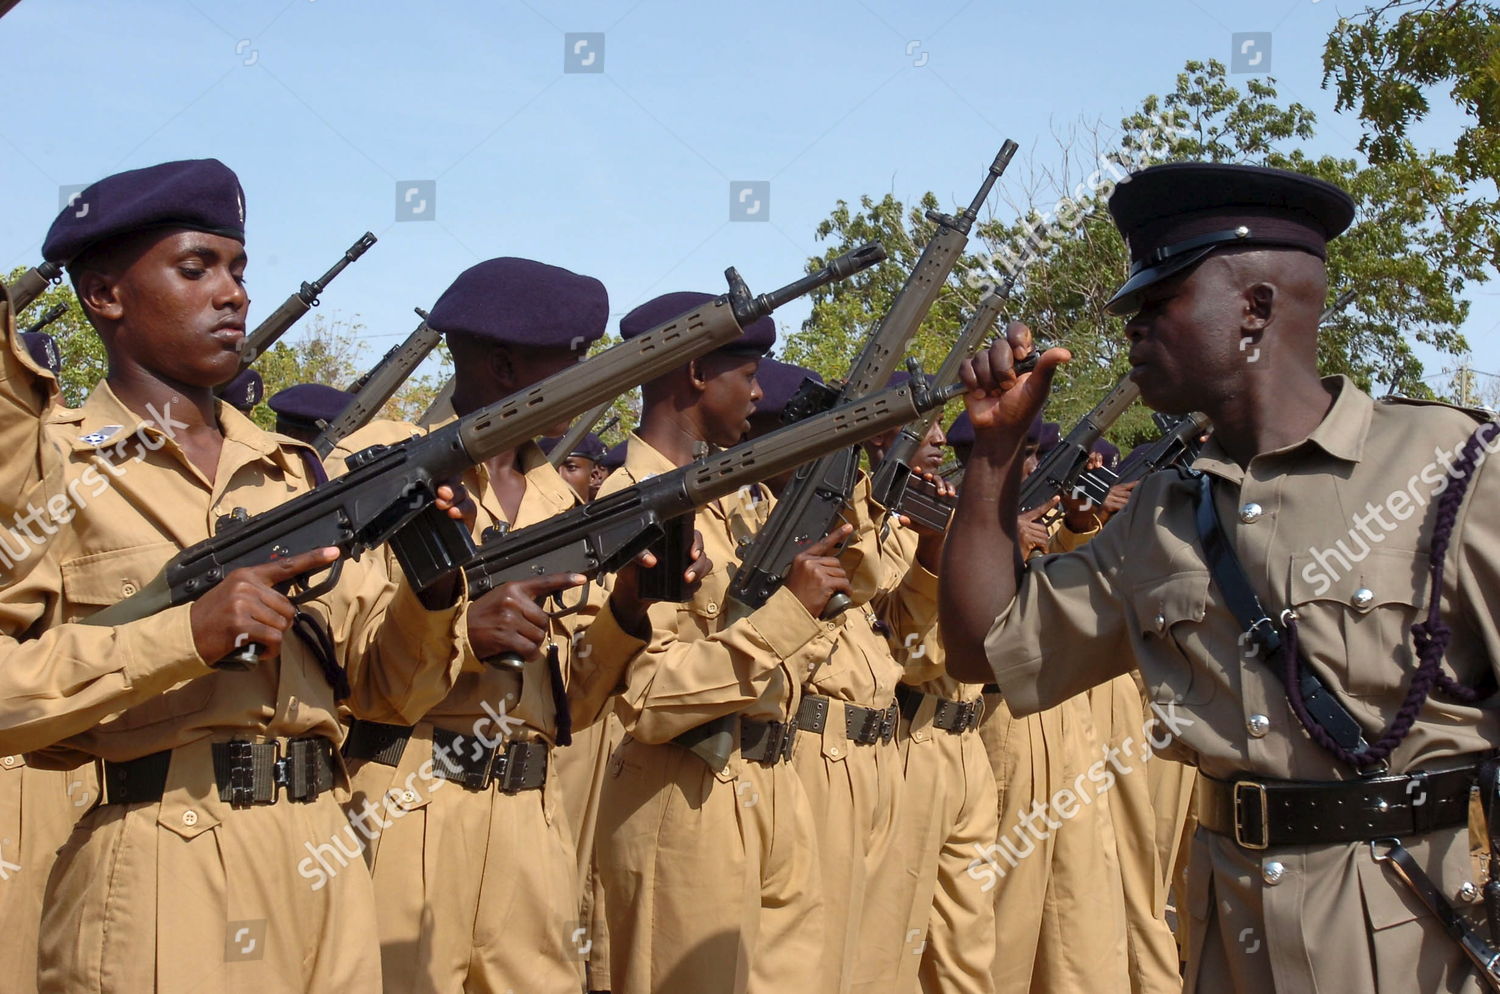 KENYA POLICE OFFICER INSPECTS G3 RIFLES Editorial Stock Photo - Stock Image  | Shutterstock